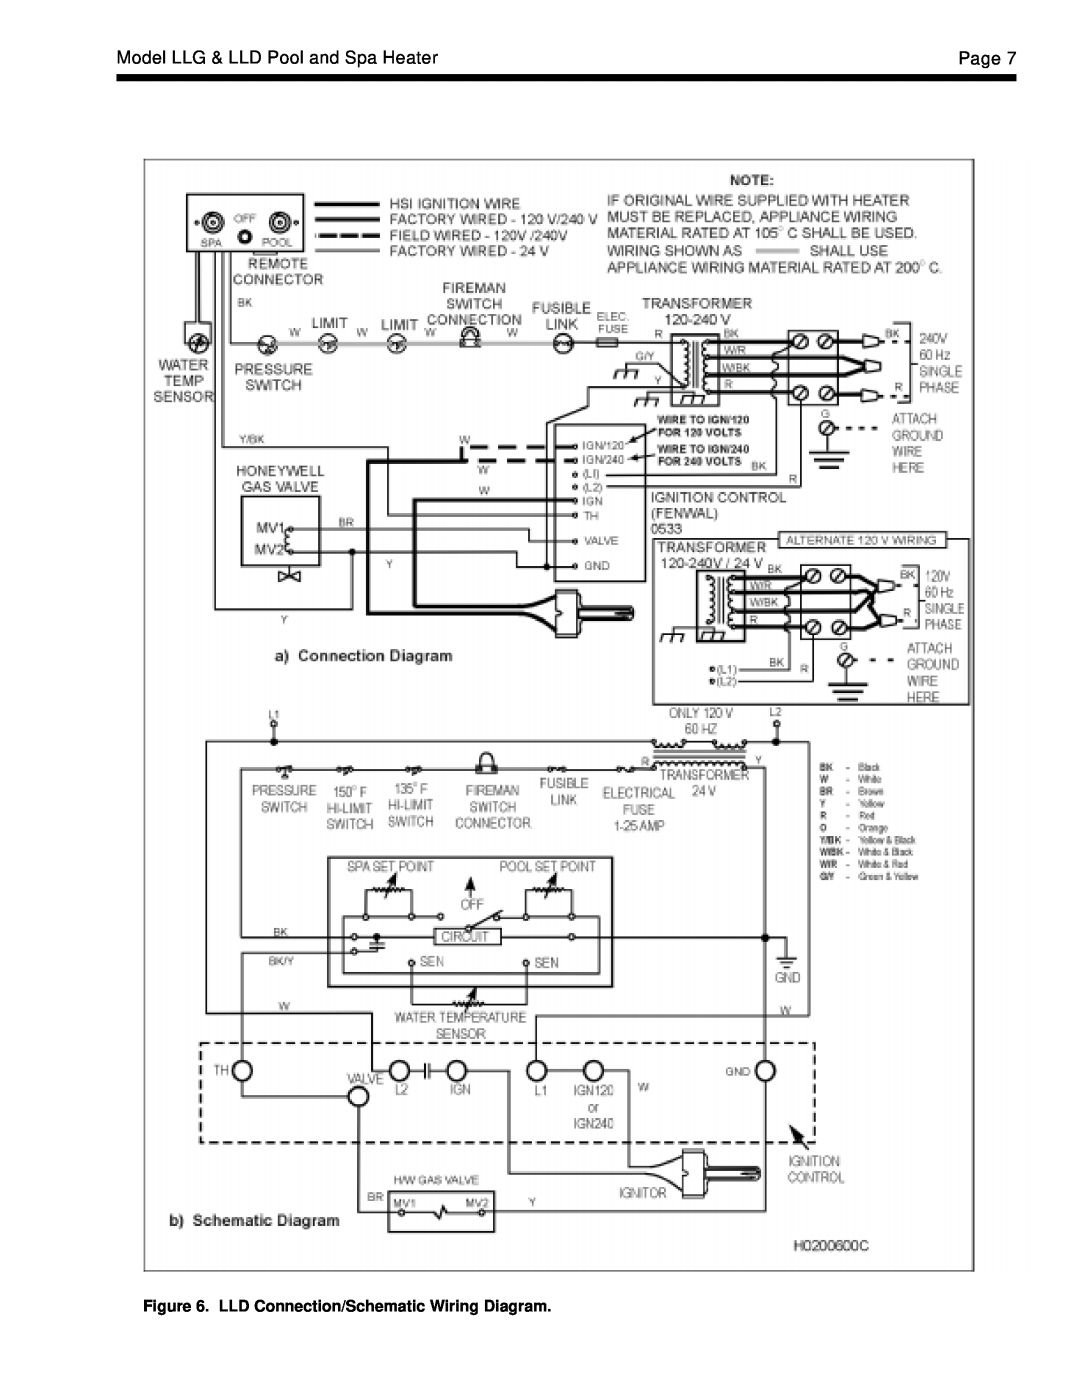 Teledyne dimensions Model LLG & LLD Pool and Spa Heater, Page, LLD Connection/Schematic Wiring Diagram 